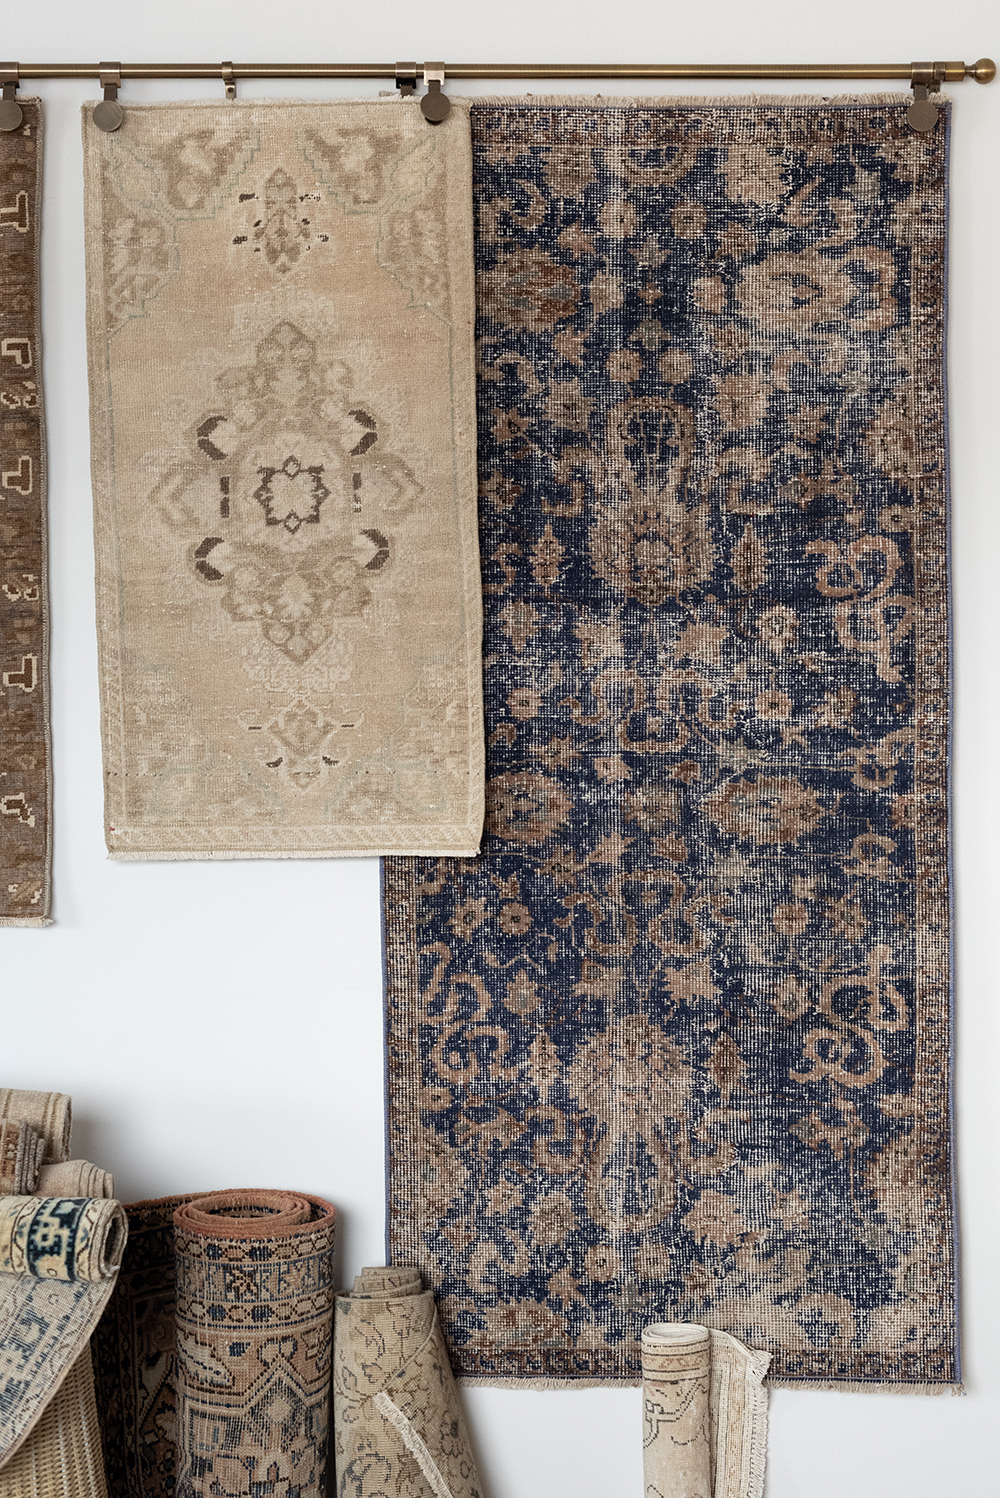 Keywords to Use When Searching for Large Vintage Rugs - roomfortuesday.com